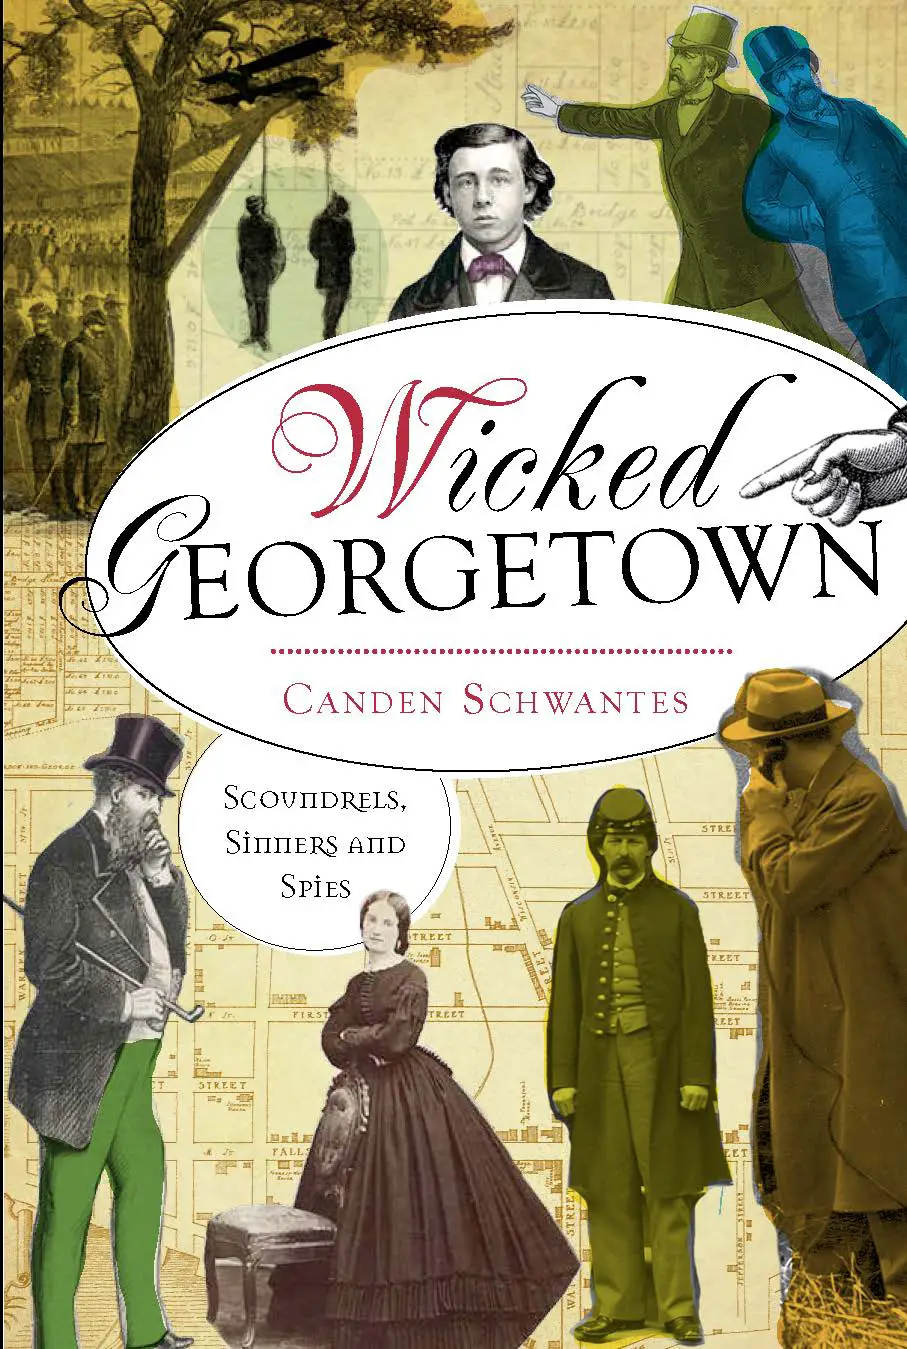 Wicked Georgetown by Canden Schwantes